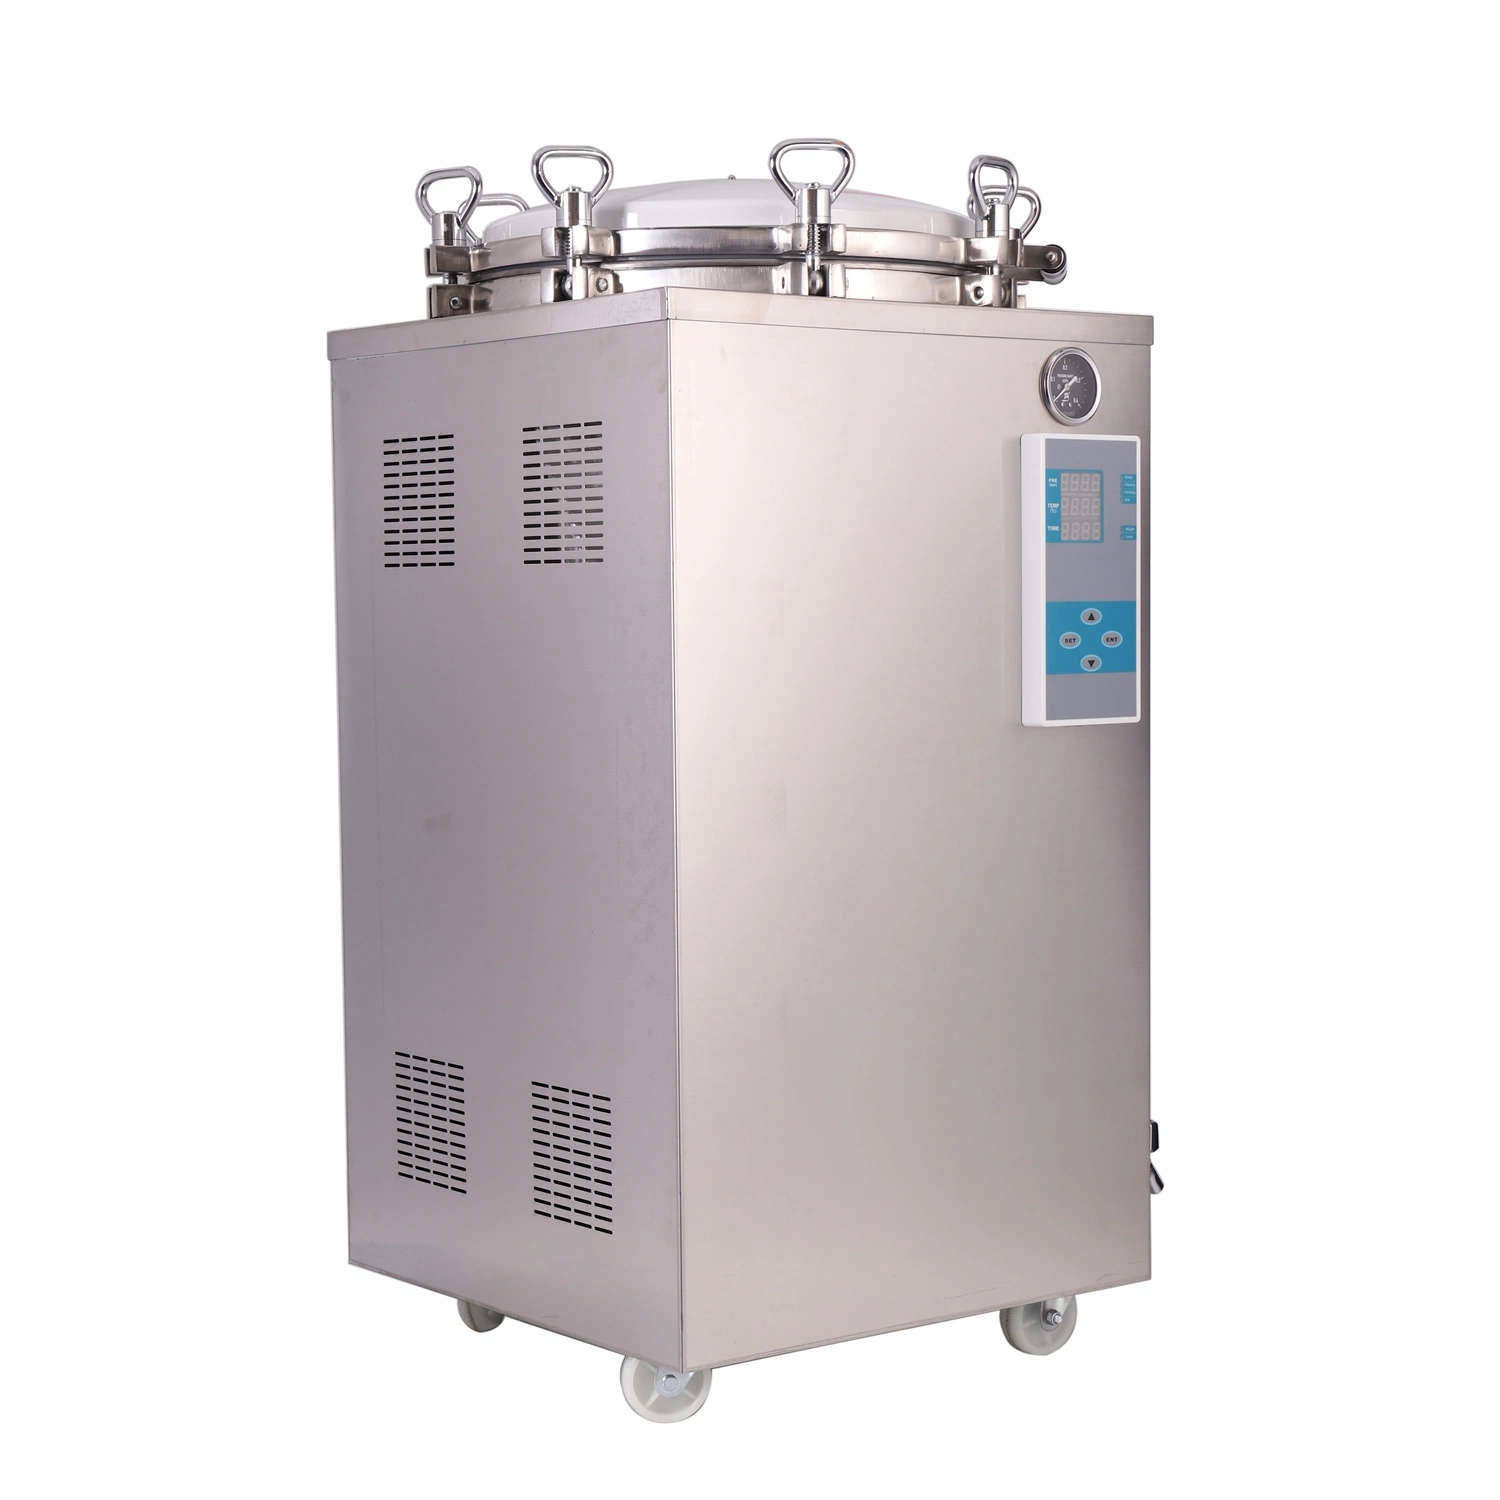 0.22MPa with LCD Display Mecan Glass Bottle Sterilization Autoclave Sterilizer